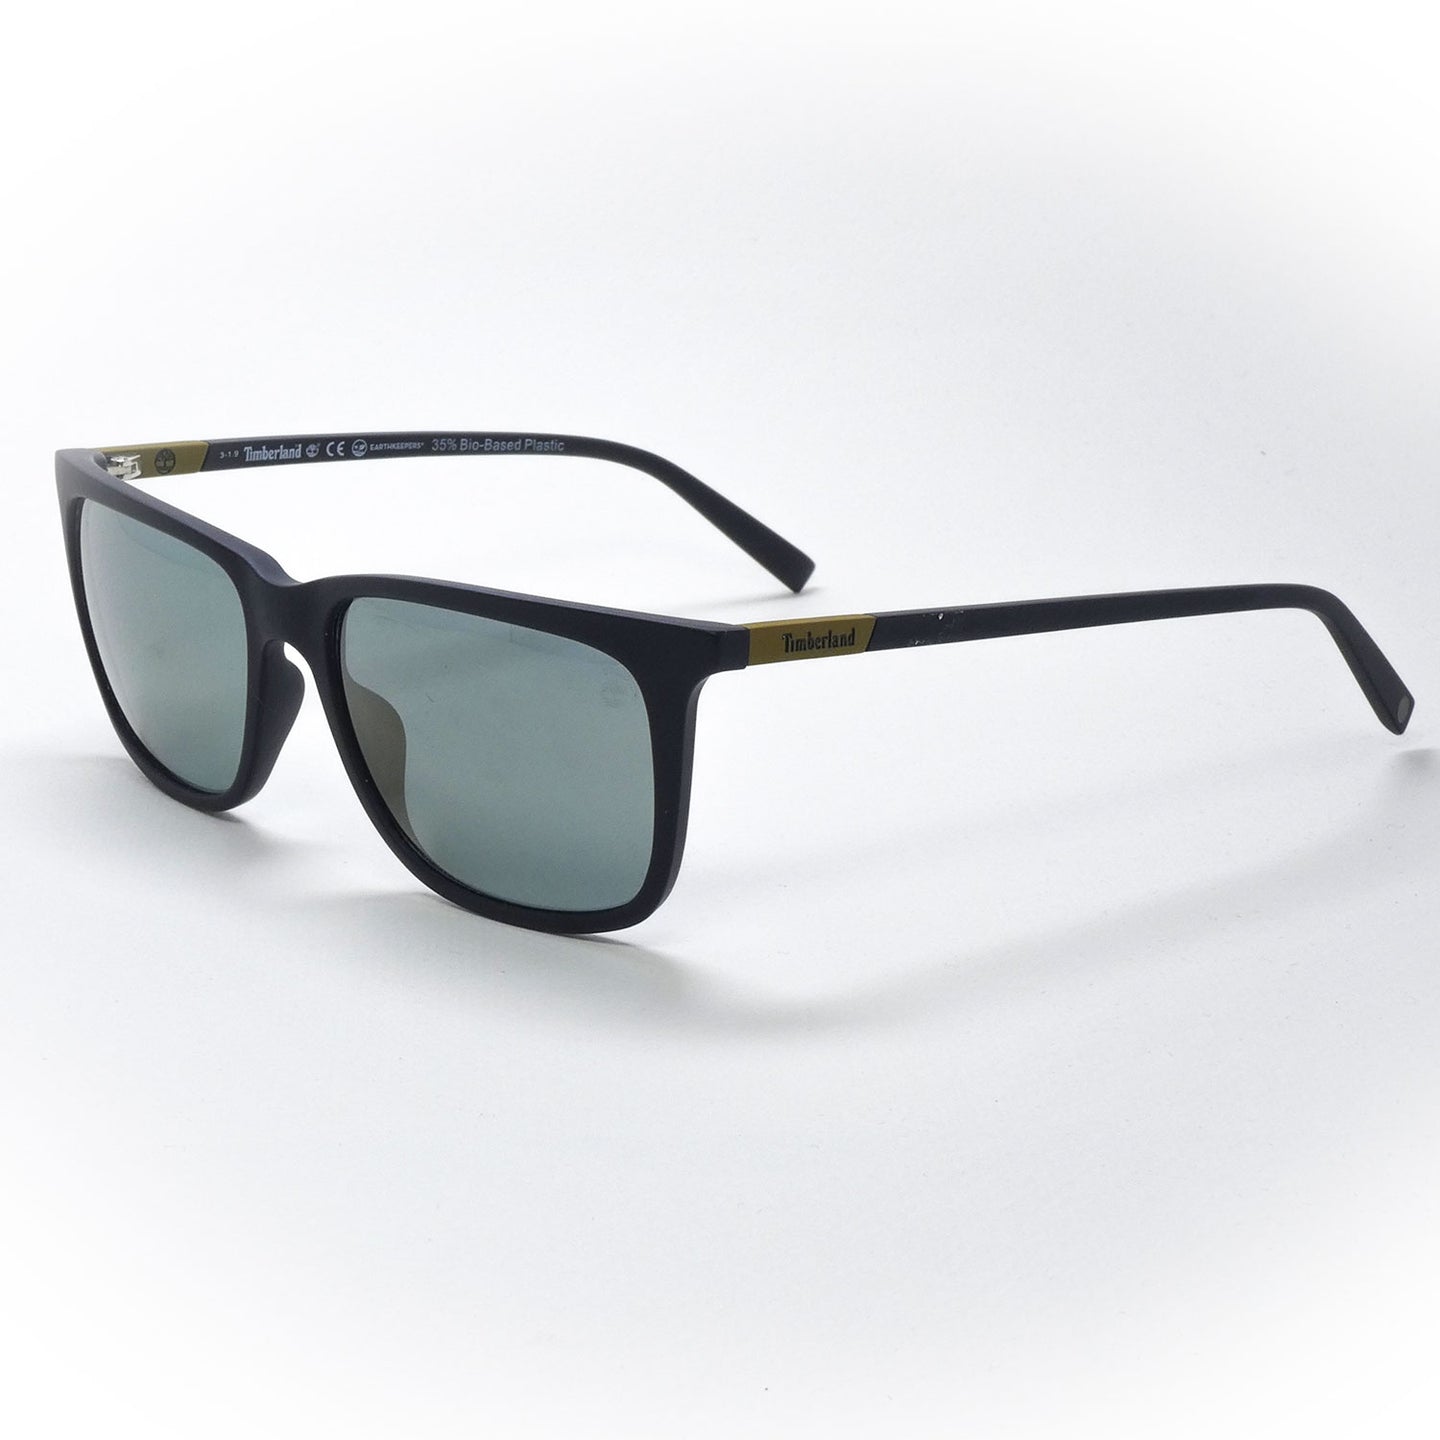 sunglasses TIMBERLAND TB 9164 color 02R size 57 angled view